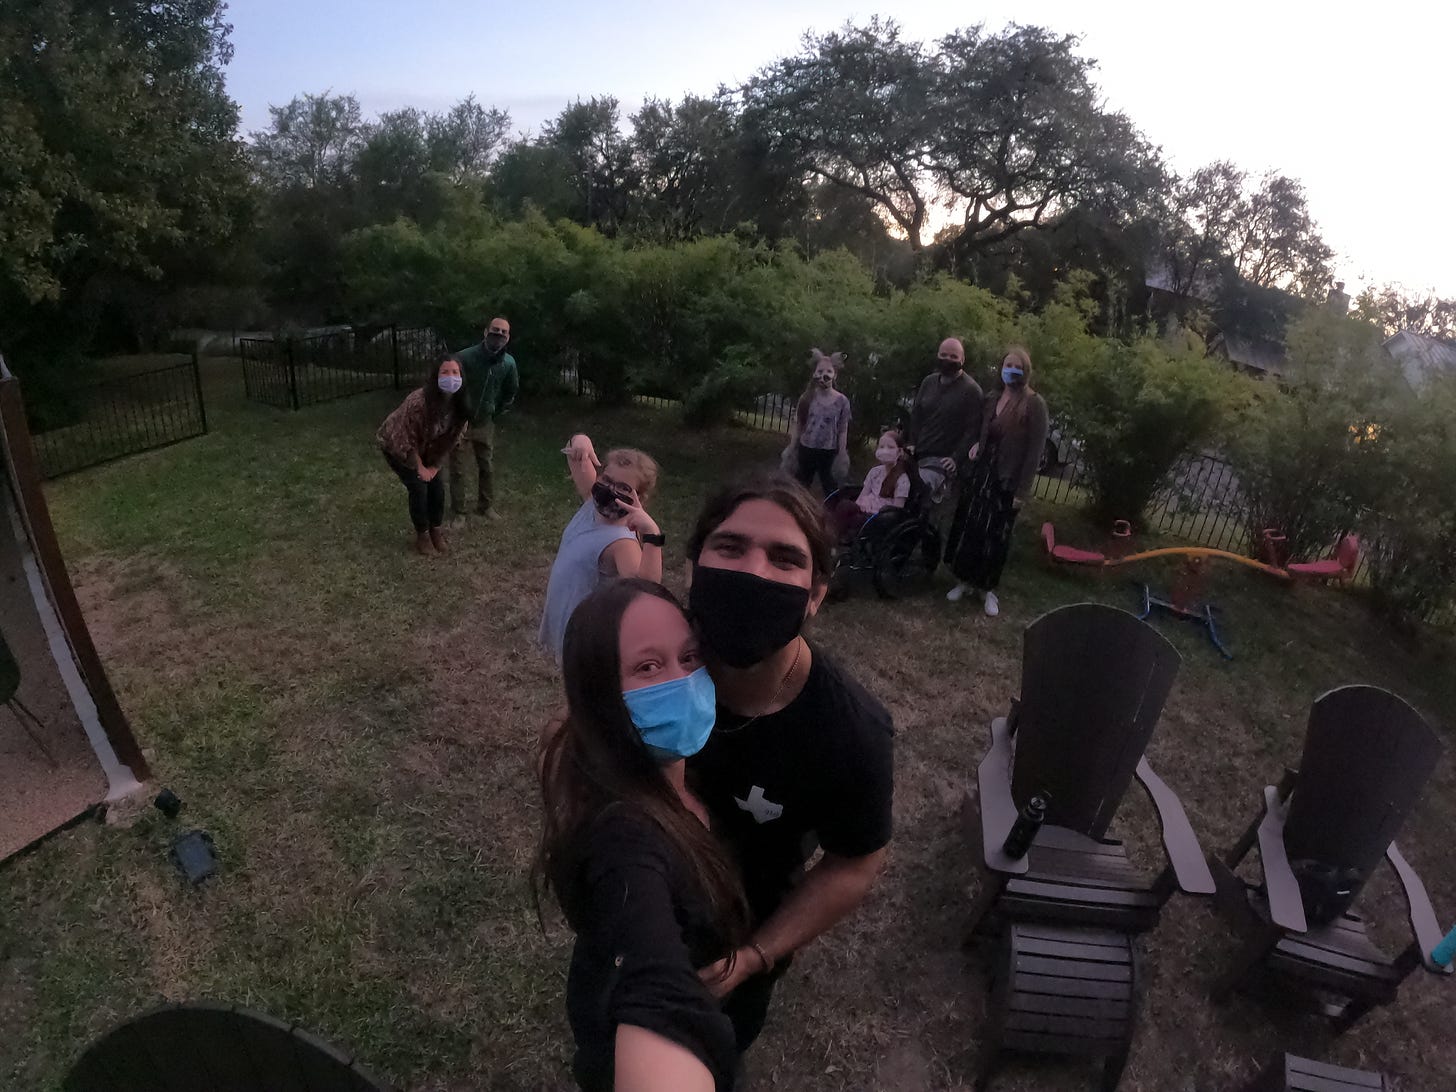 Anthony and Kelly stand and selfie with the backyard audience everyone is wearing masks!